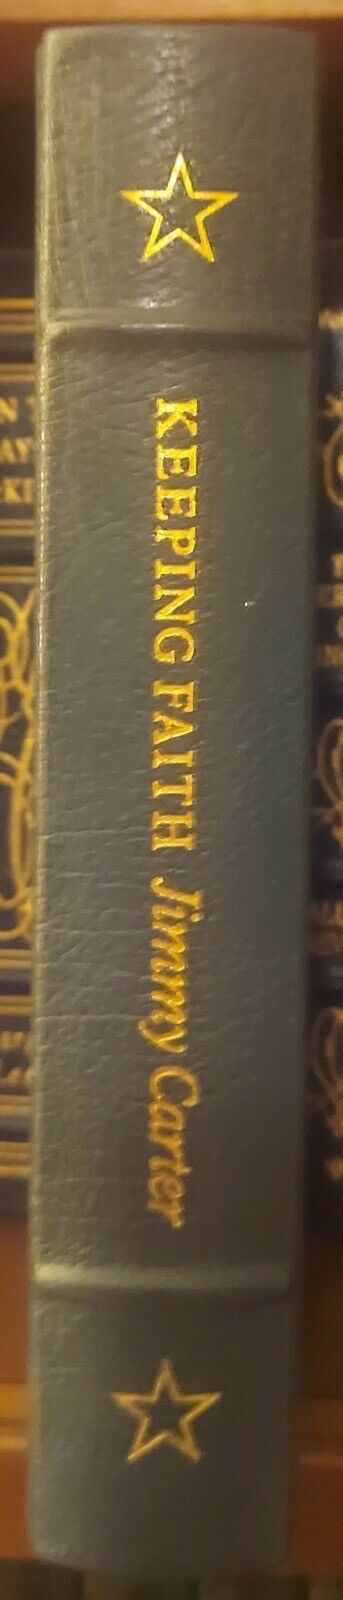 Jimmy Carter Keeping Faith Easton Press Signed Collector's Edition